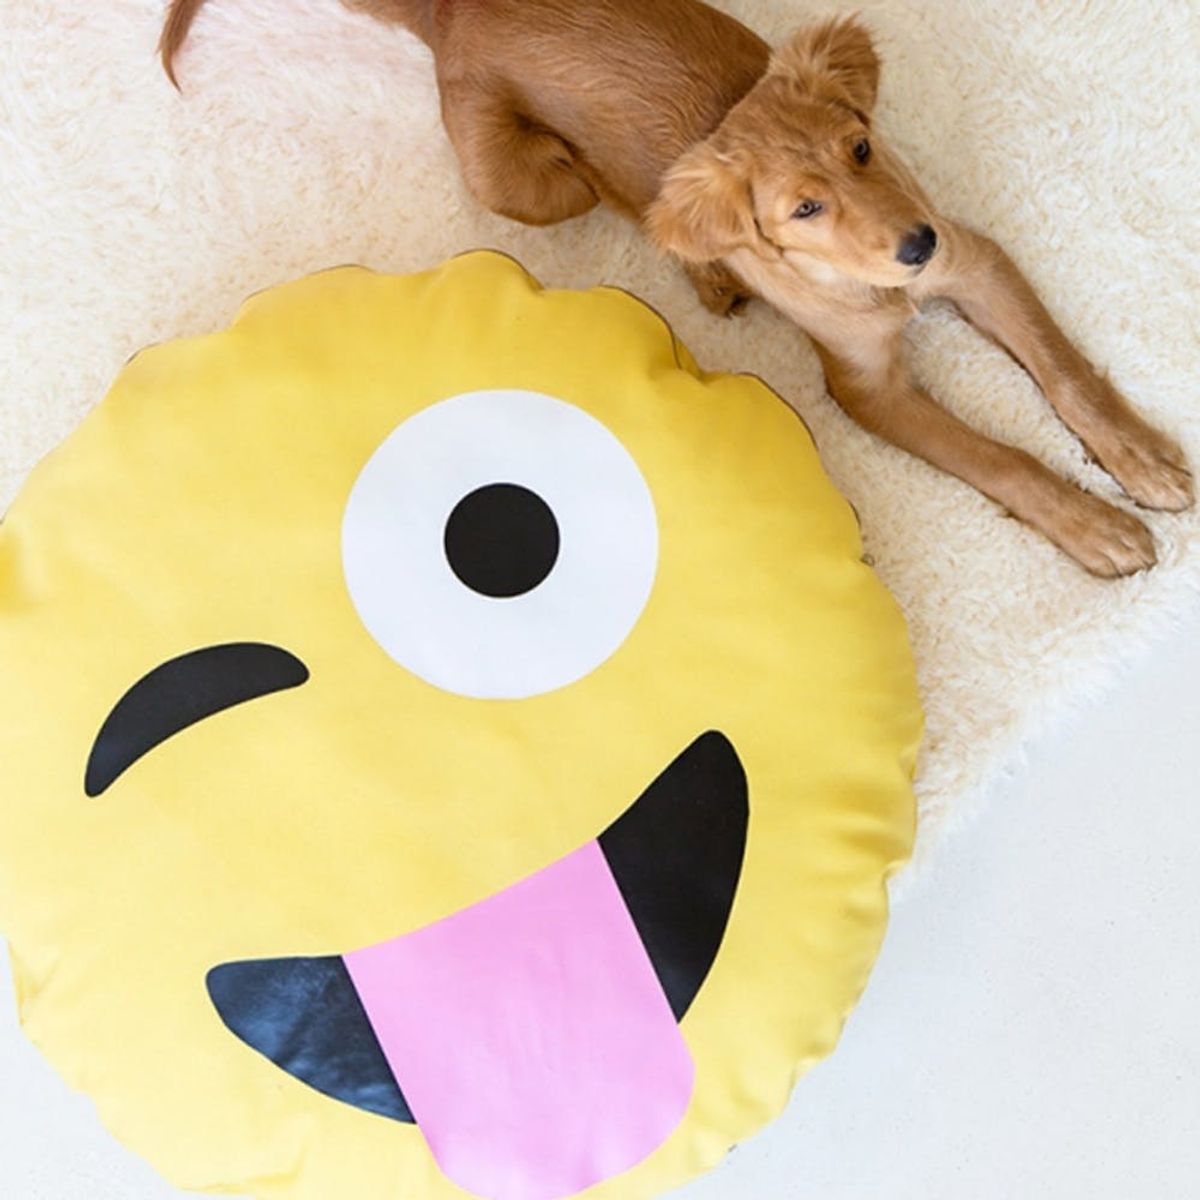 What to Make This Weekend: Grown-Up Sand Art, an Emoji Dog Bed + More